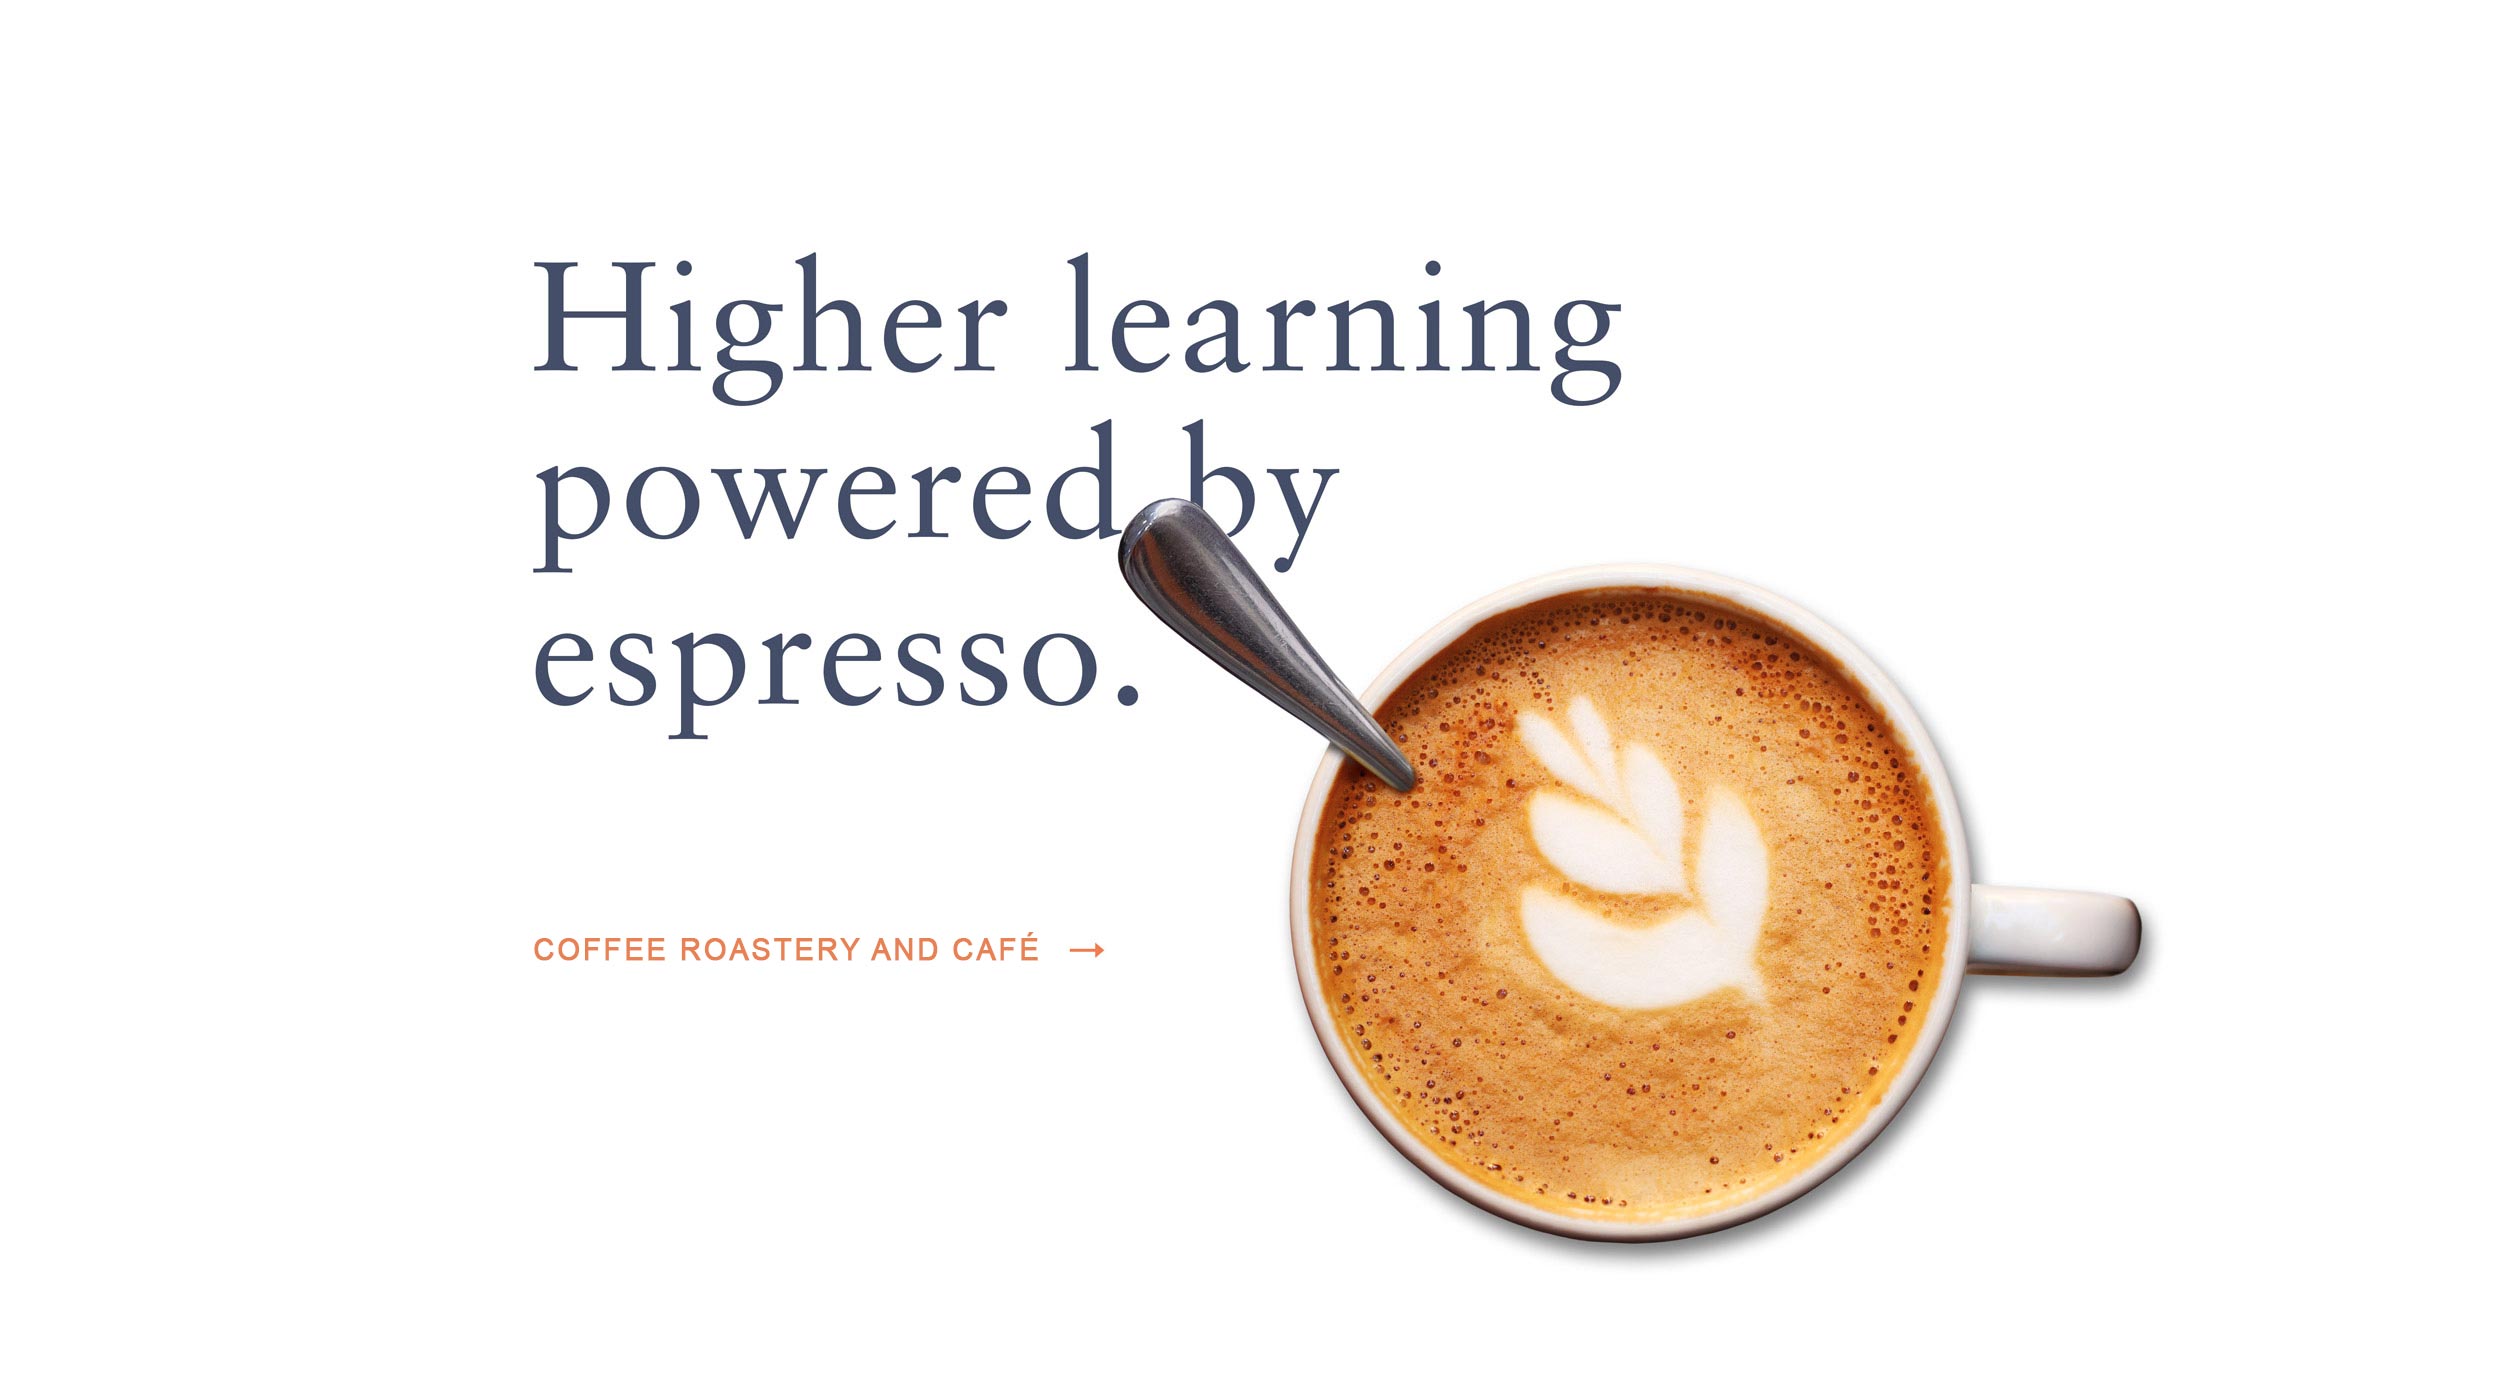 Higher learning powered by espresso.